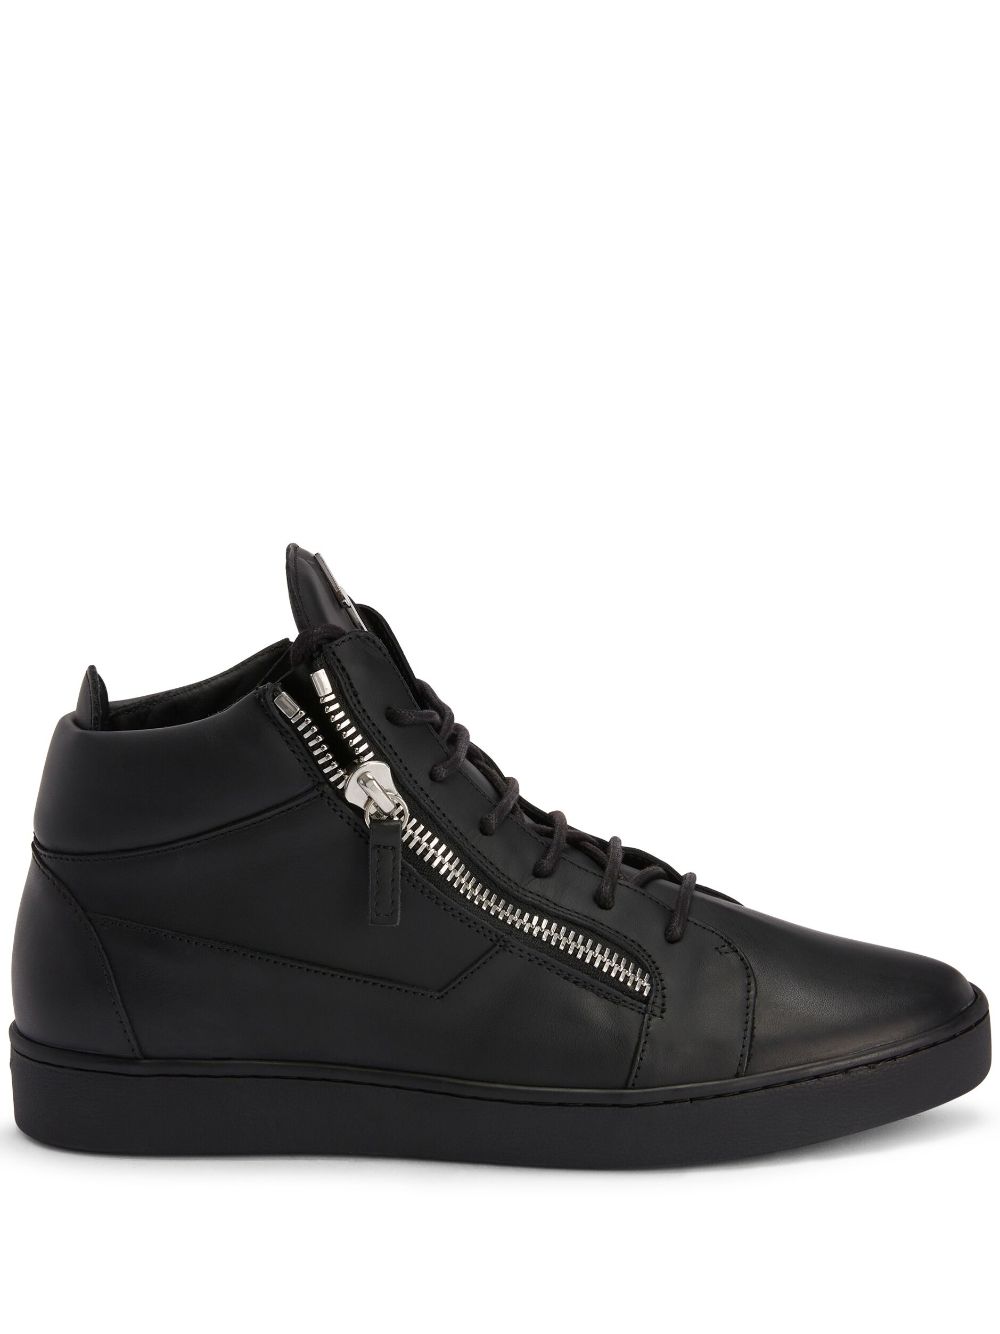 Kriss leather sneakers